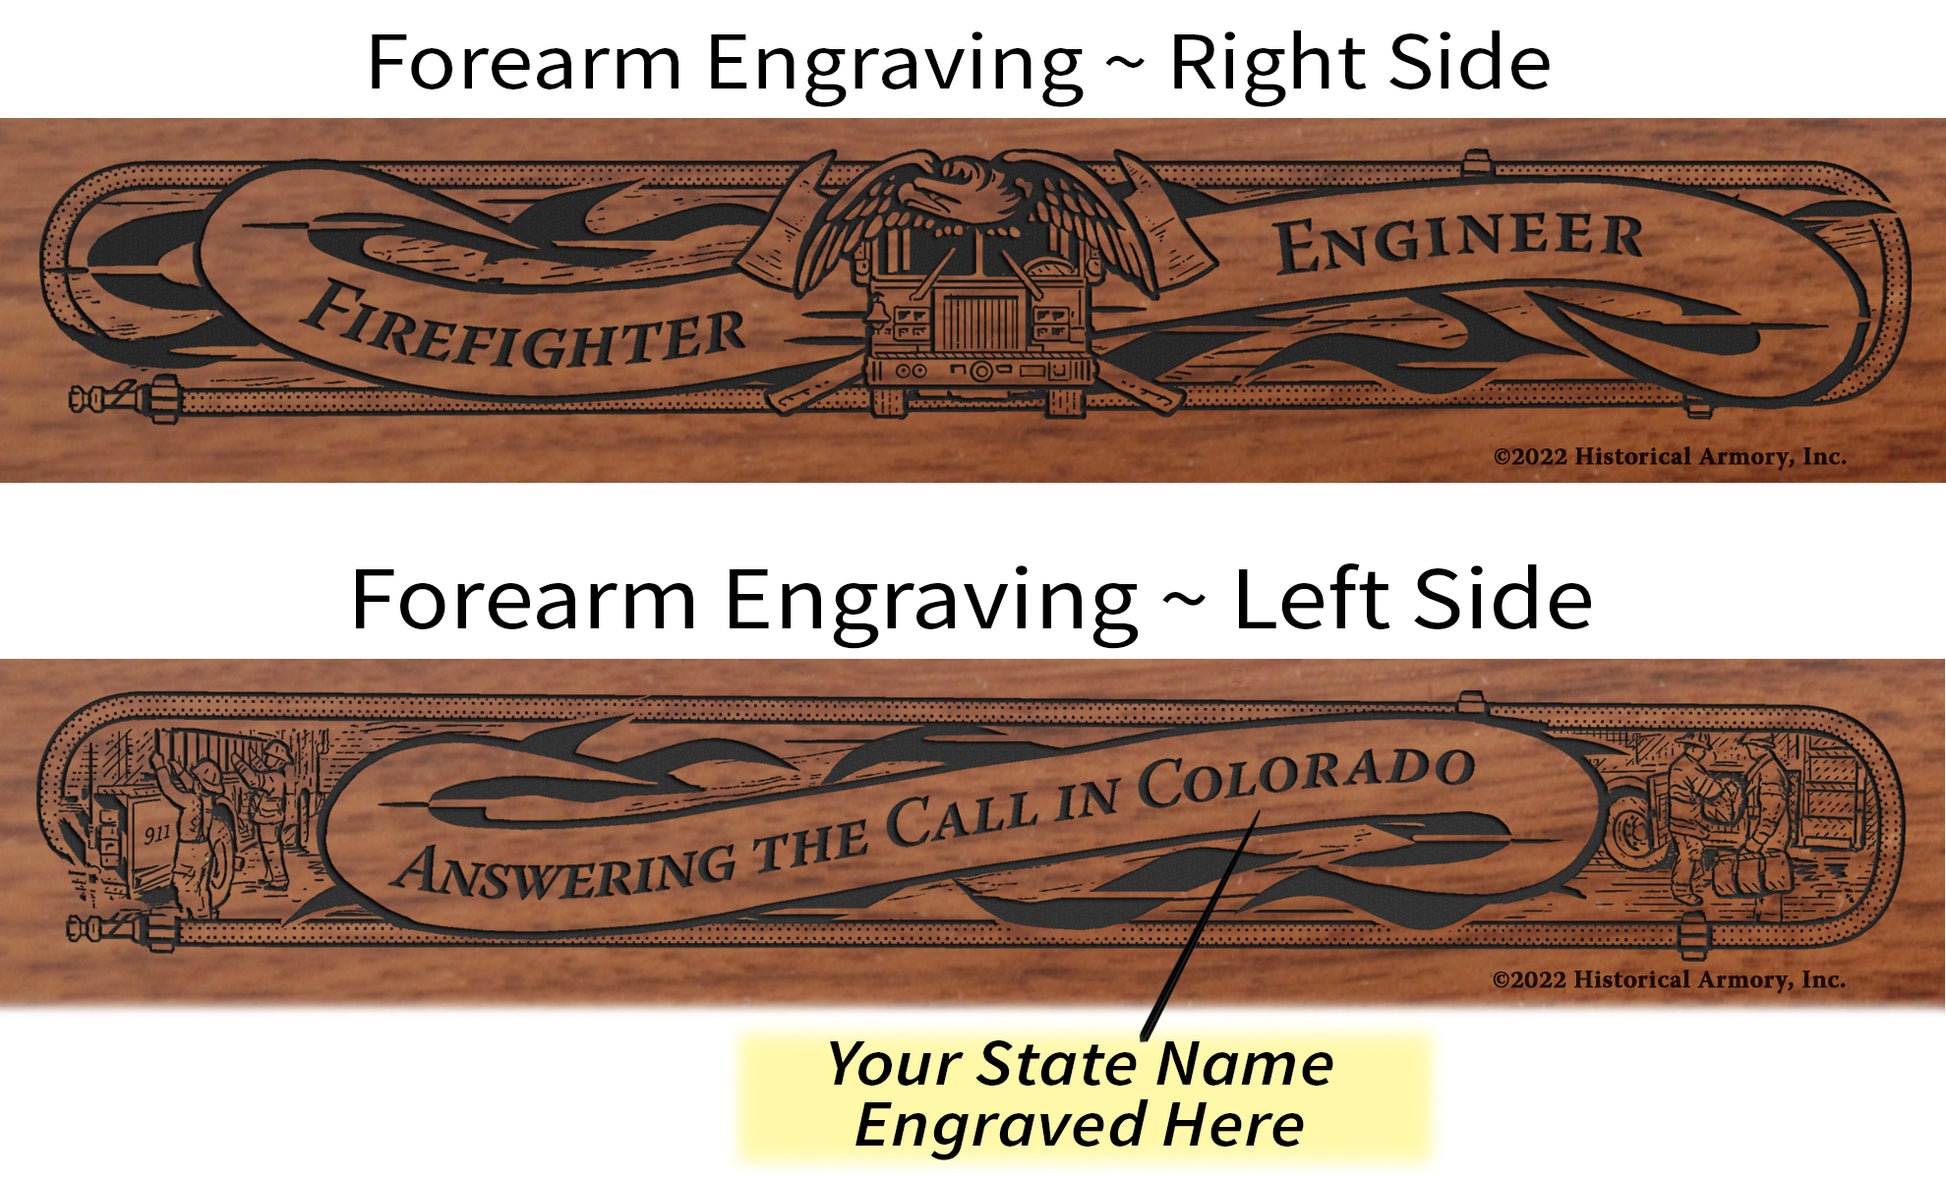 Firefighter Engineer Engraved Rifle Forearm